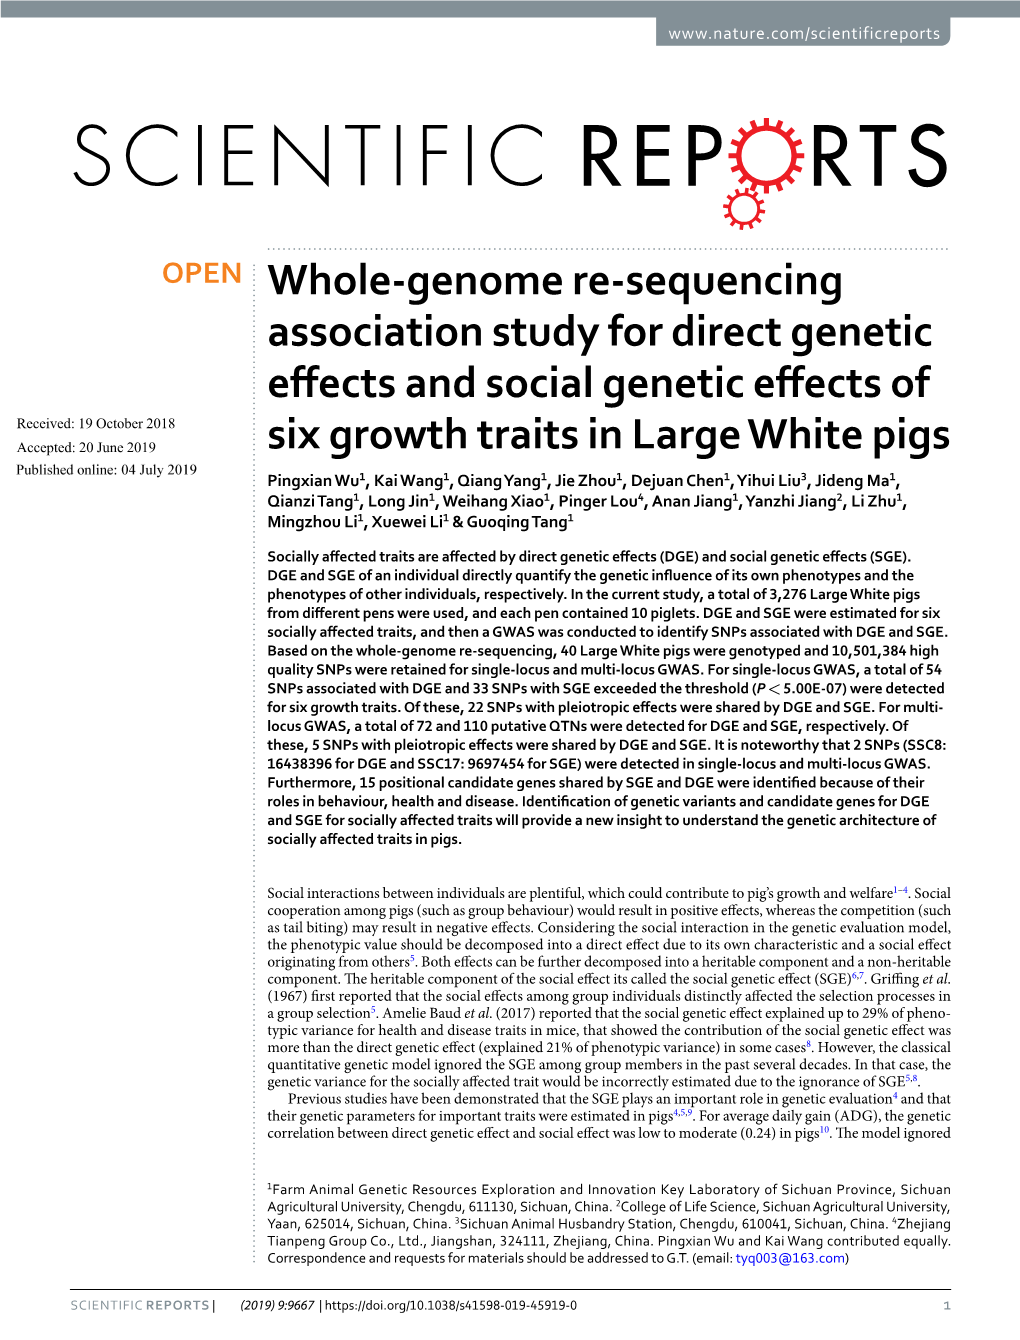 Whole-Genome Re-Sequencing Association Study for Direct Genetic